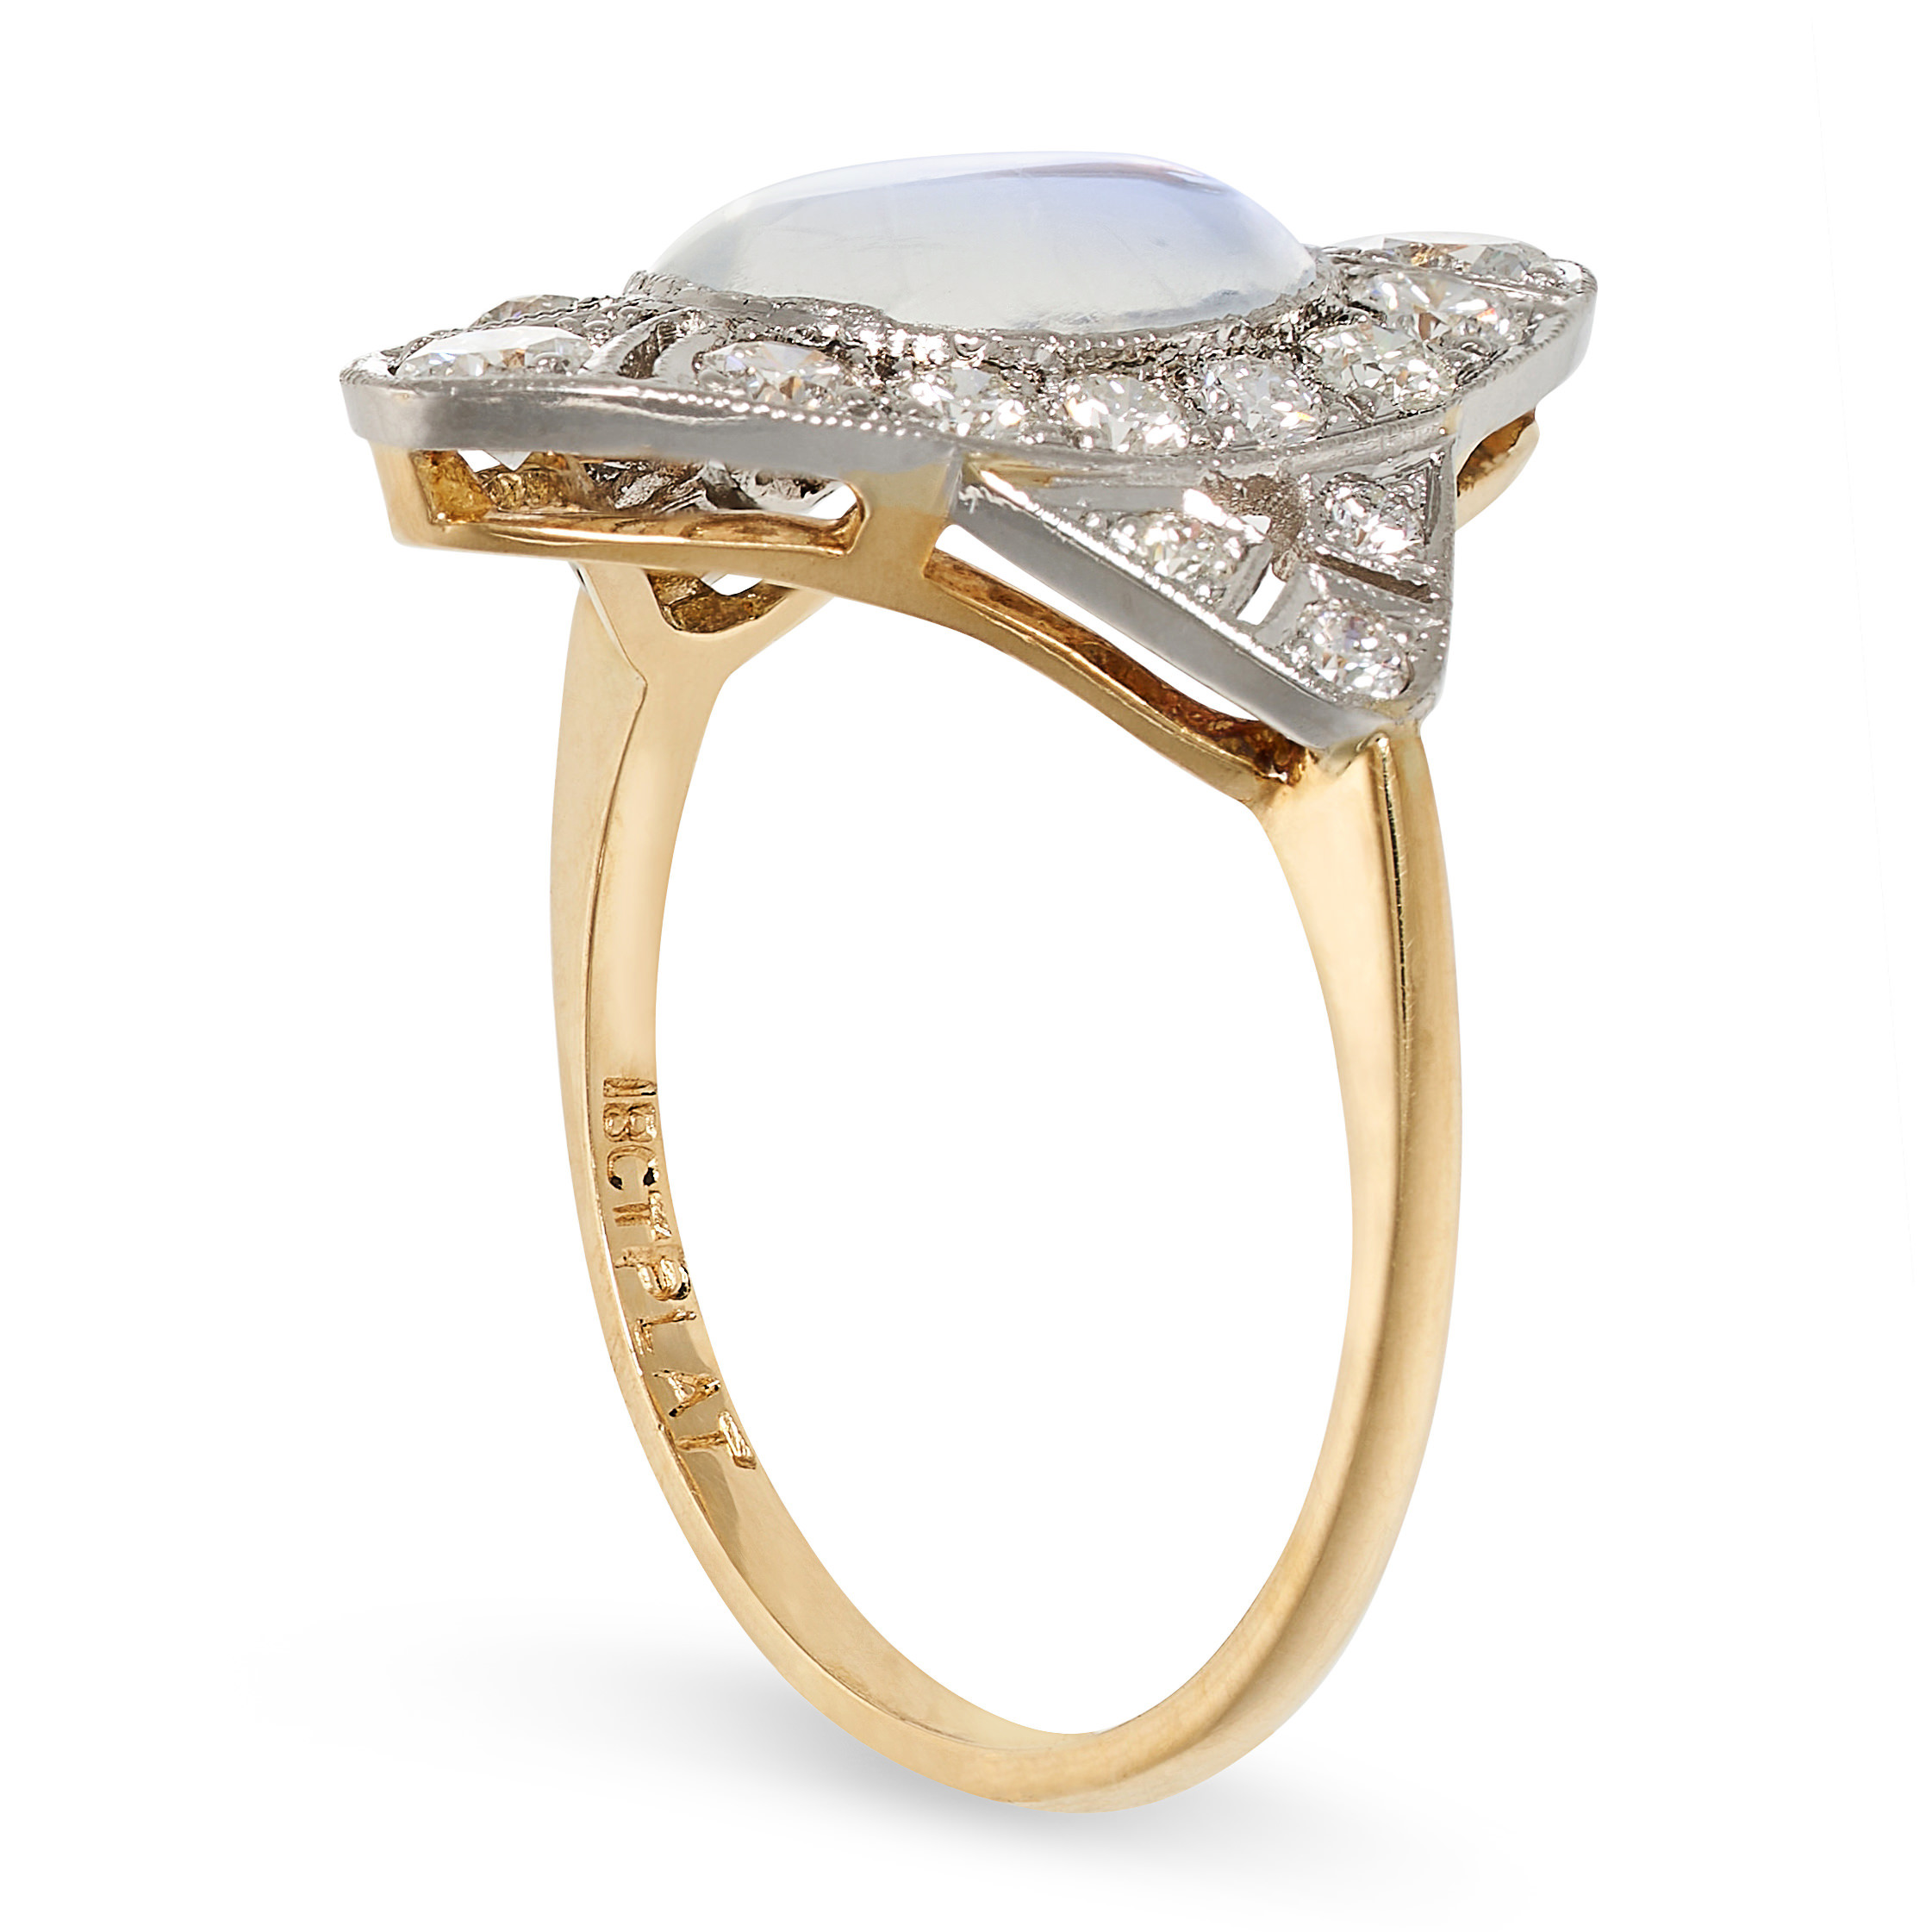 A MOONSTONE AND DIAMOND DRESS RING in 18ct yellow gold and platinum, the navette shaped face set - Image 2 of 2